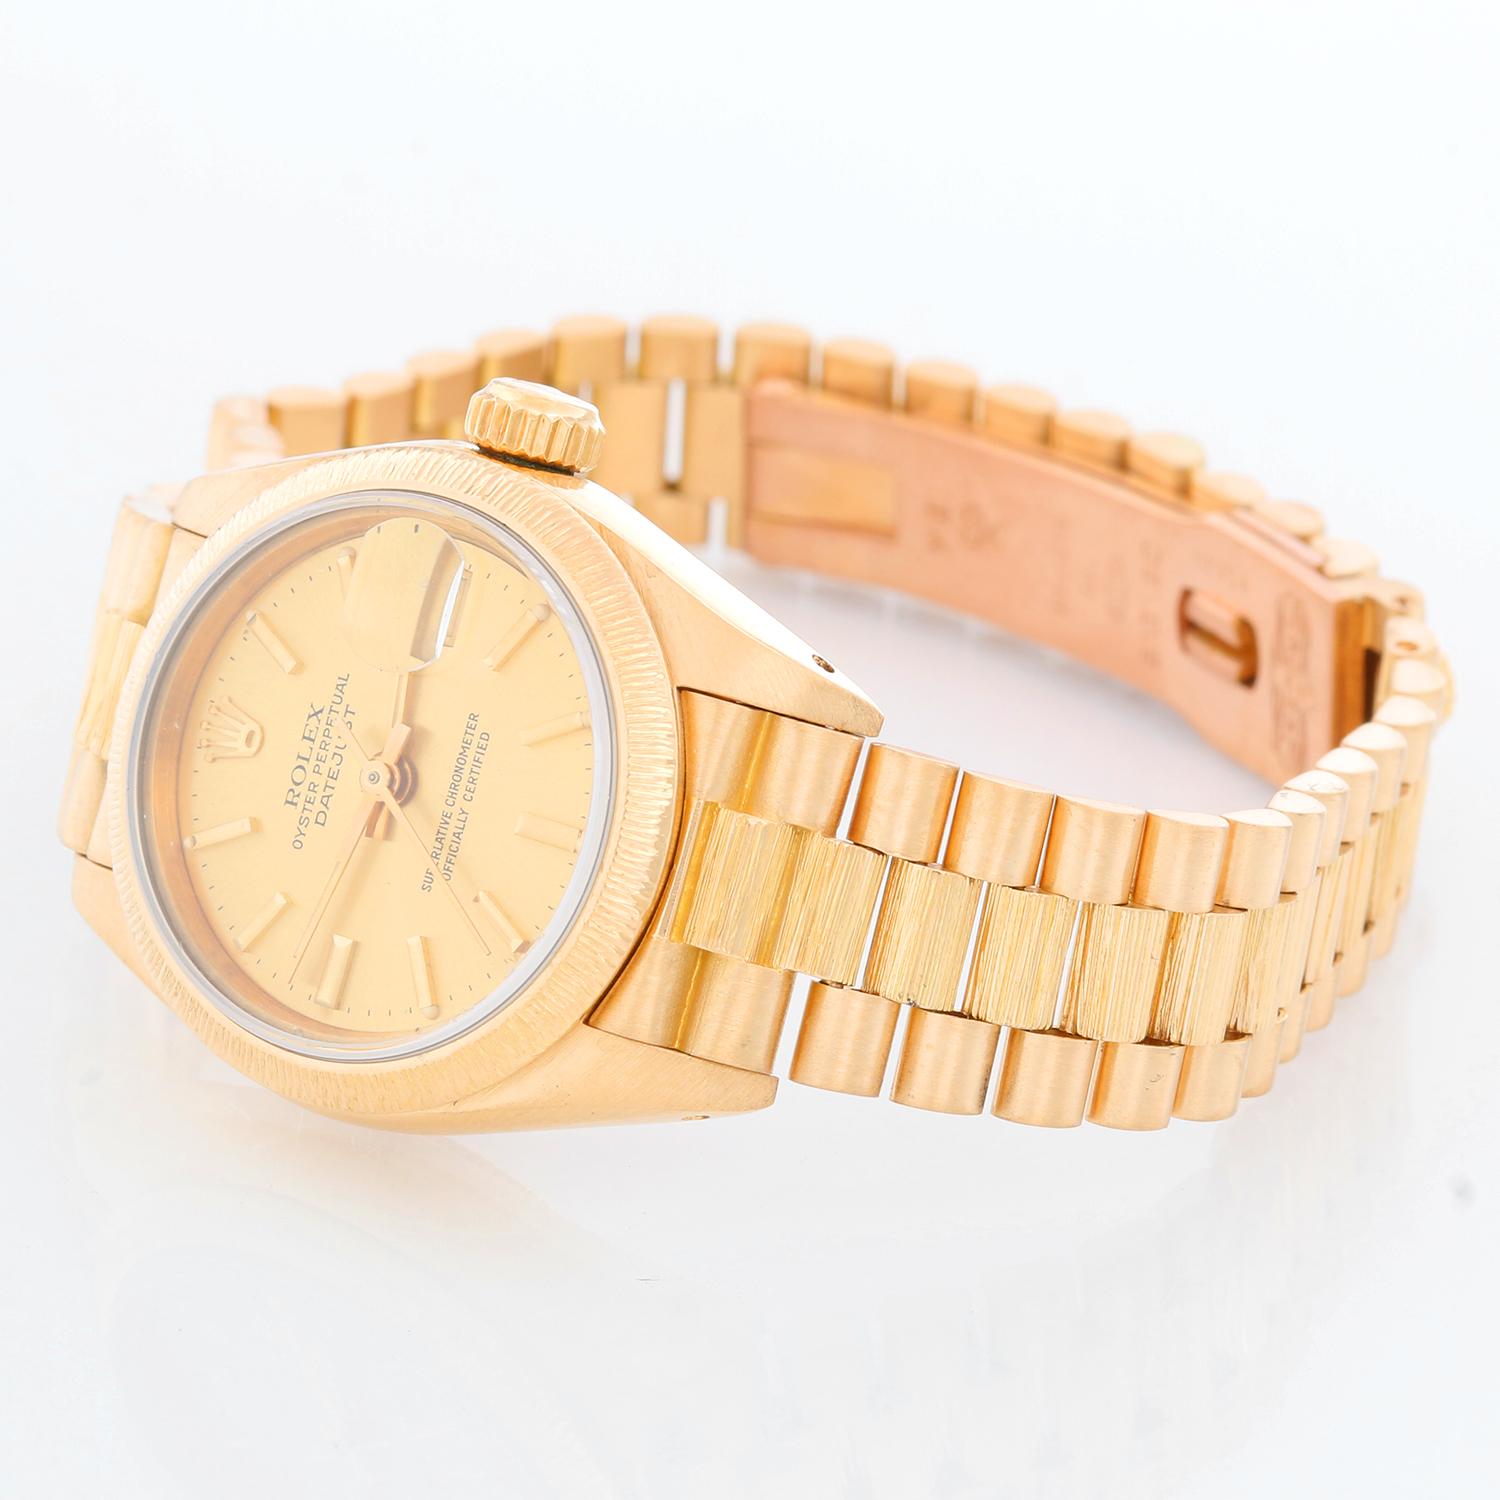 Rolex Ladies Bark President Gold Watch 69278 - Automatic winding, 29 jewels, Quickset, sapphire crystal. 18k yellow gold with bark bezel (26 mm). Champagne dial. 18k yellow gold hidden-clasp President bracelet with barked center links. Pre-owned